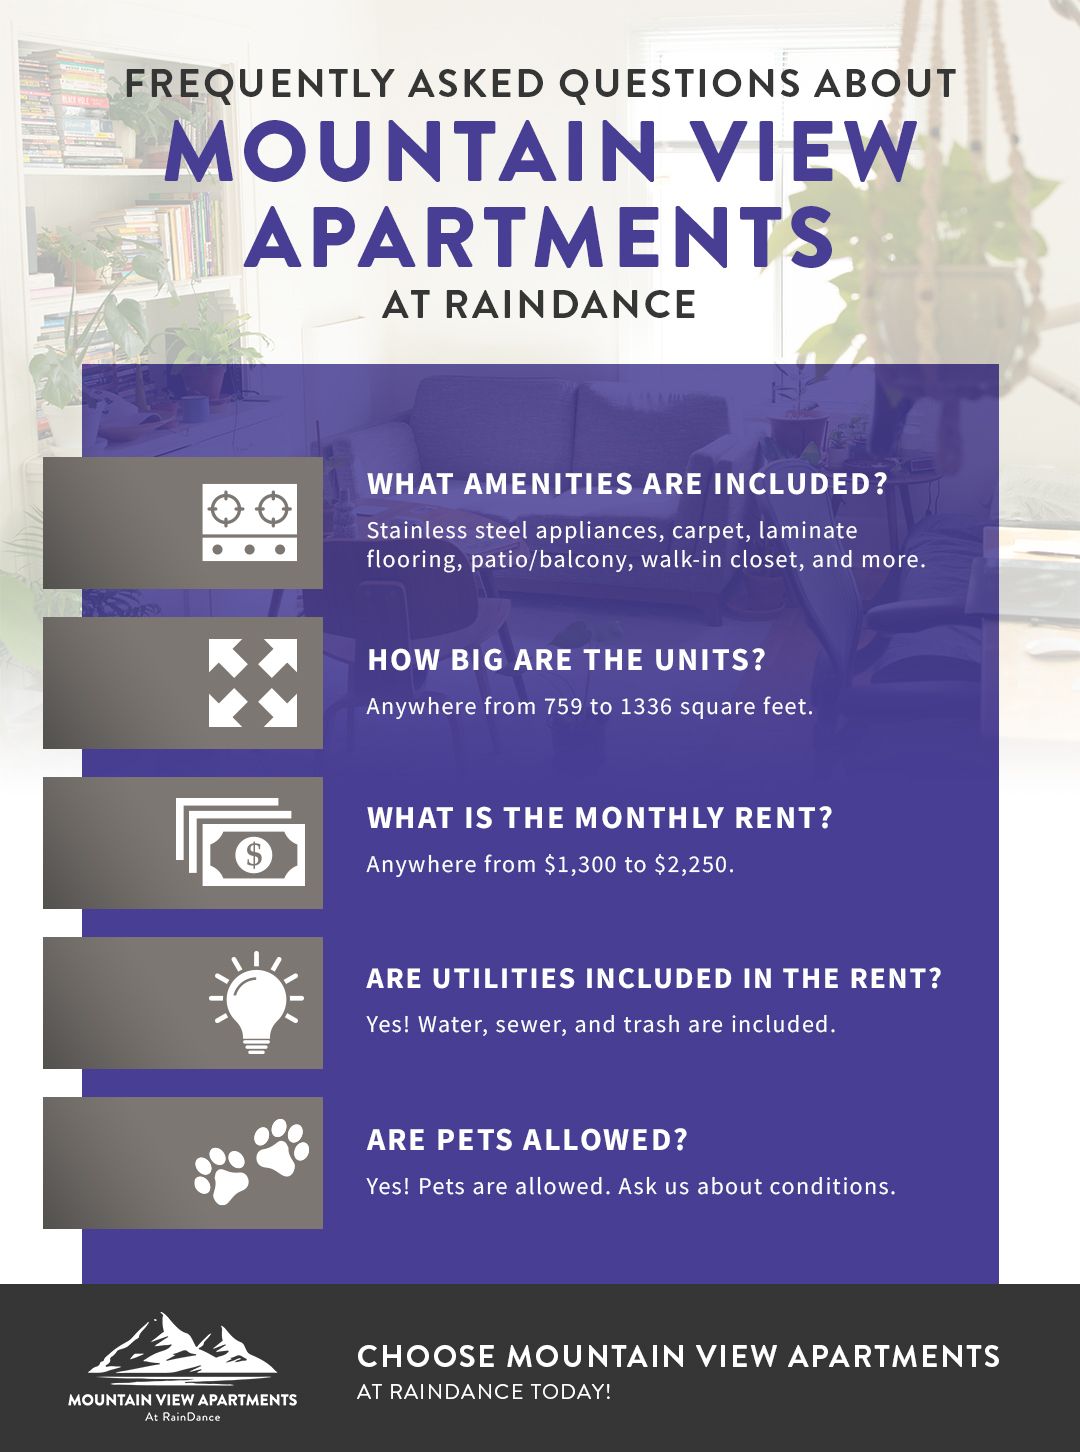 Frequently Asked Questions About Mountain View Apartments at Raindance.jpg